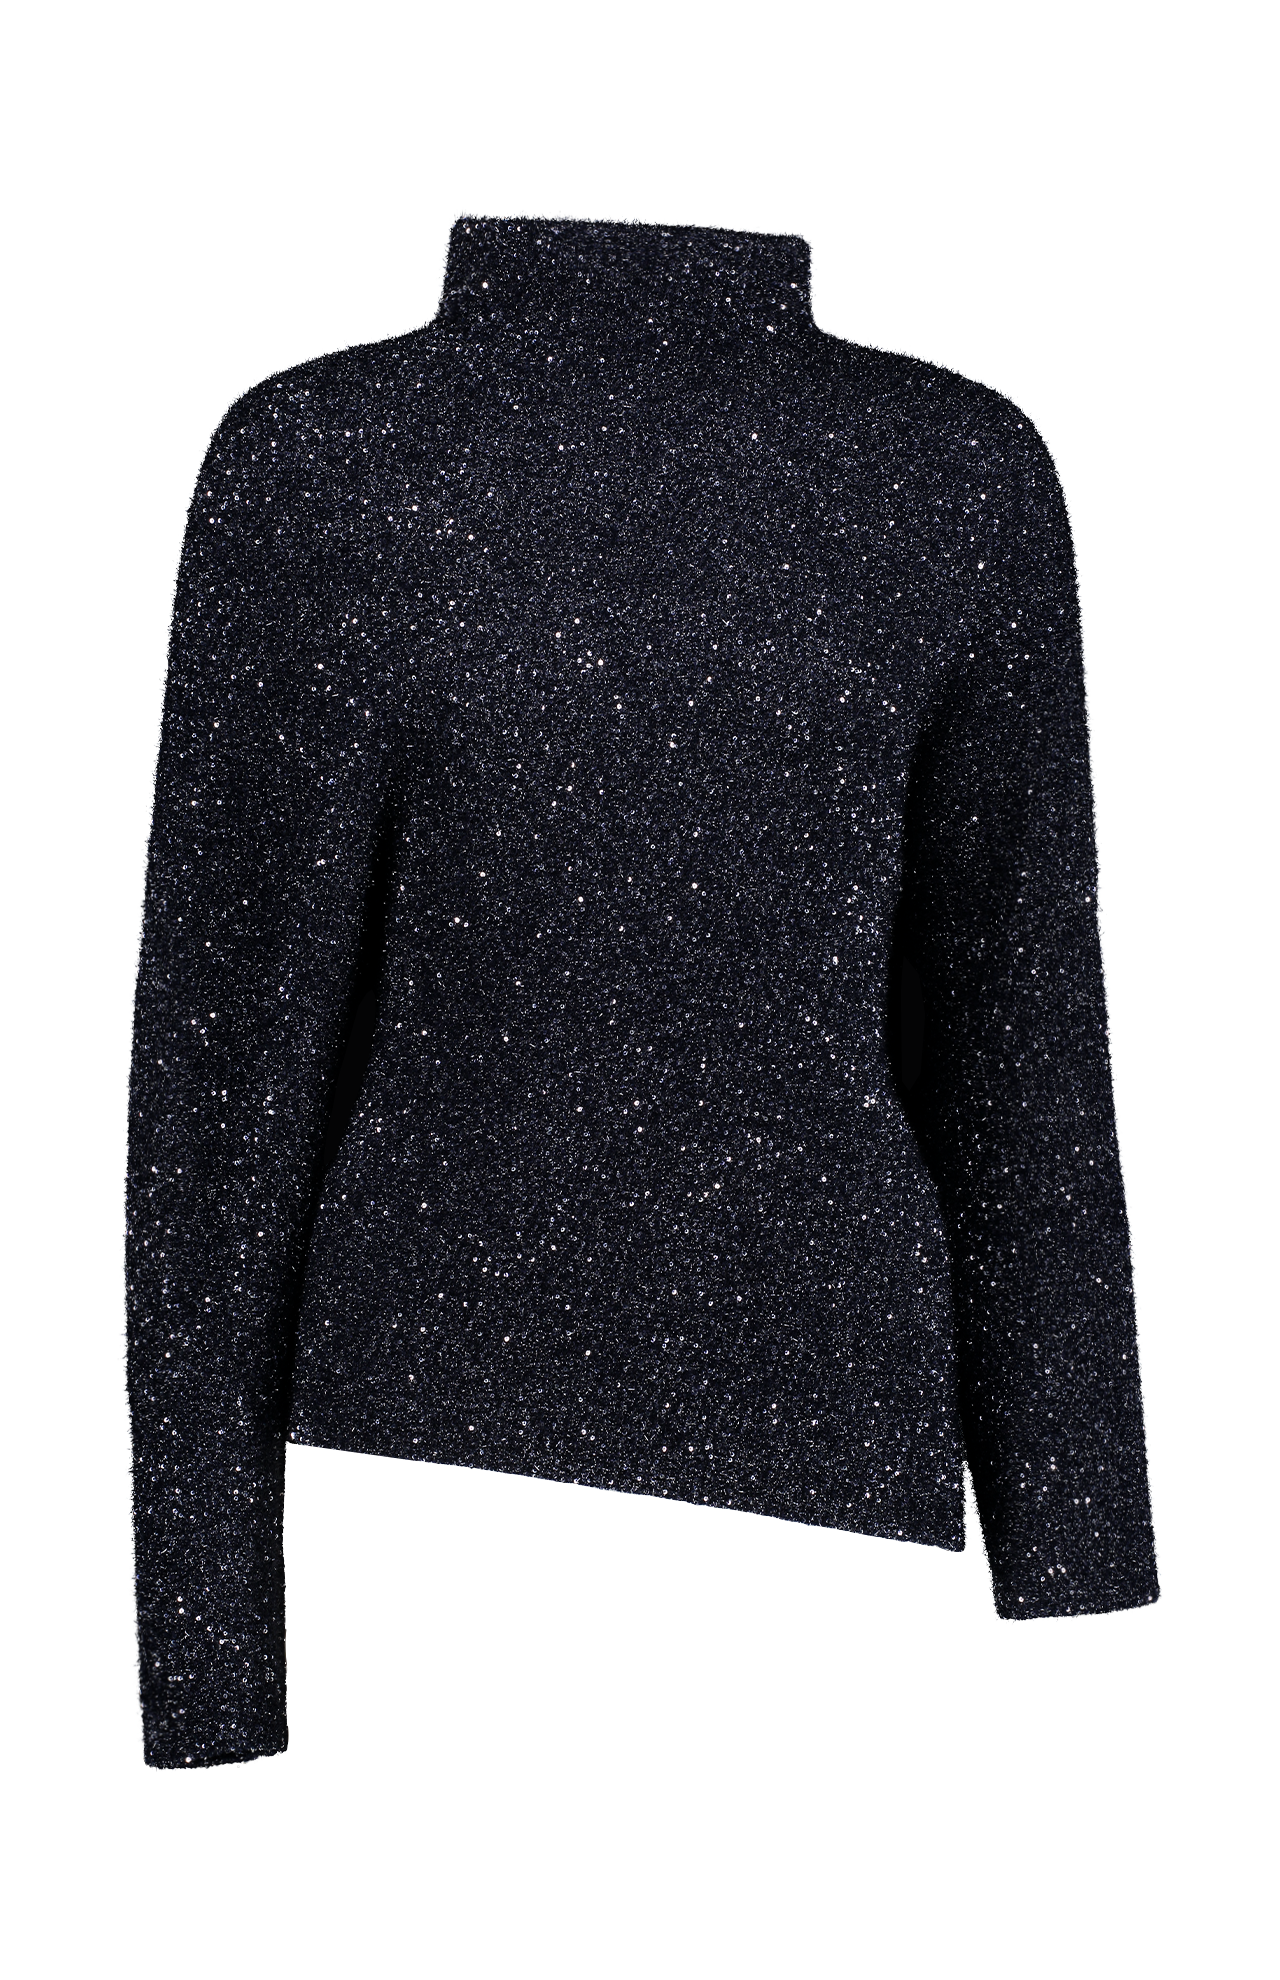 Technical Sequin Sweater (7162960445555)